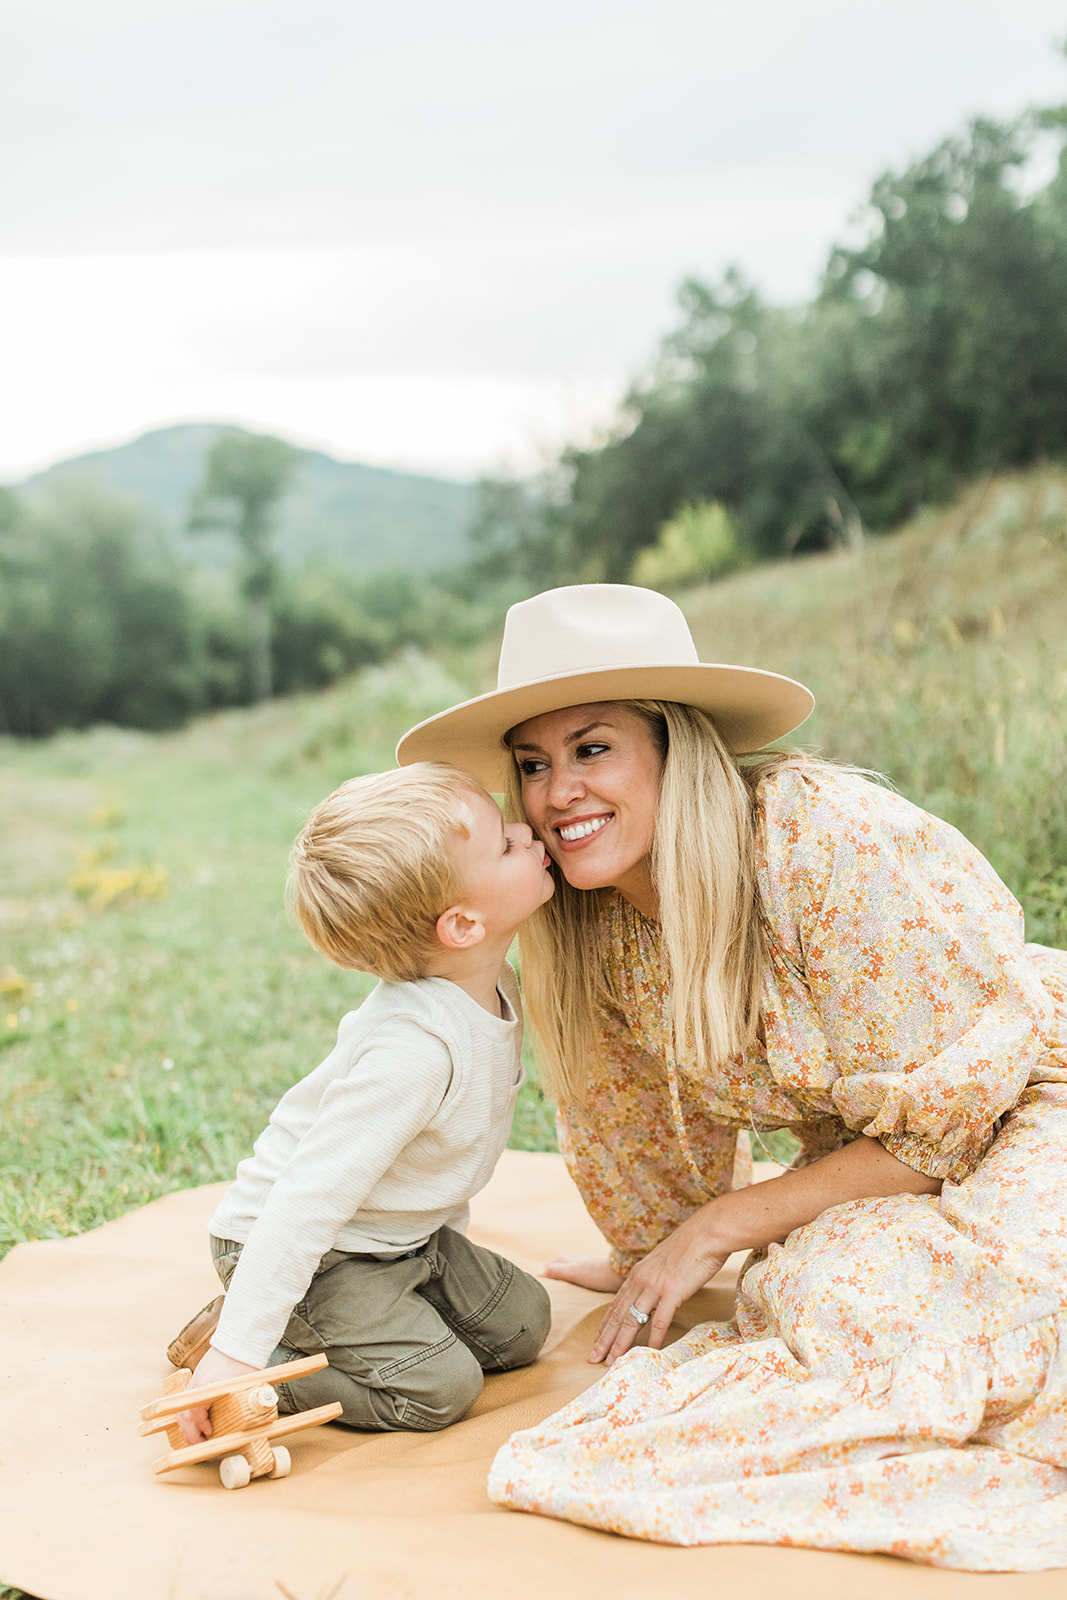 outdoor family session in nashville tennessee. little boy and mom